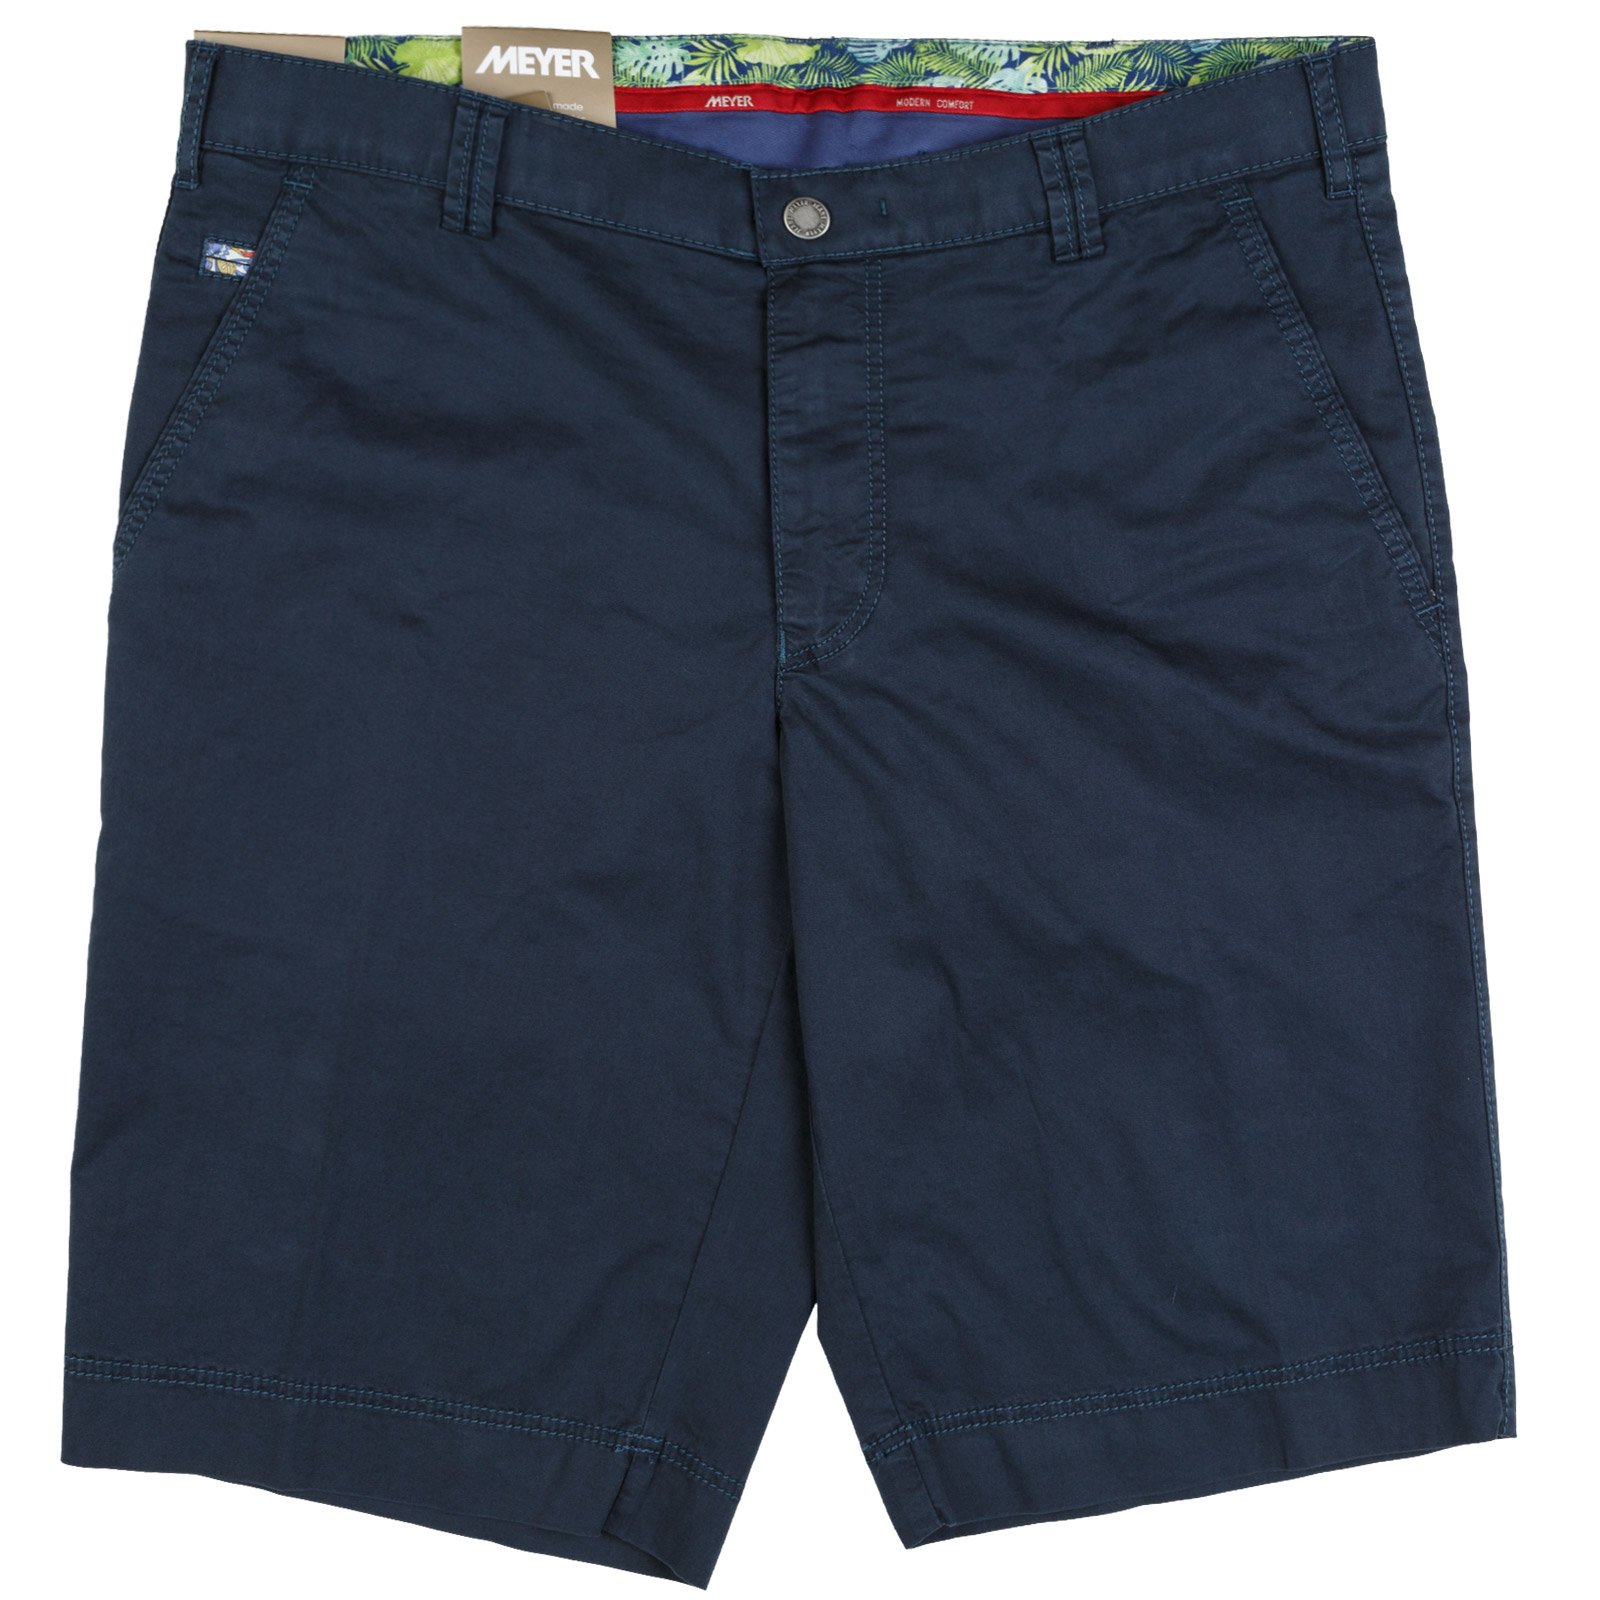 meyer shorts sale Cheaper Than Retail Price> Buy Clothing, Accessories ...